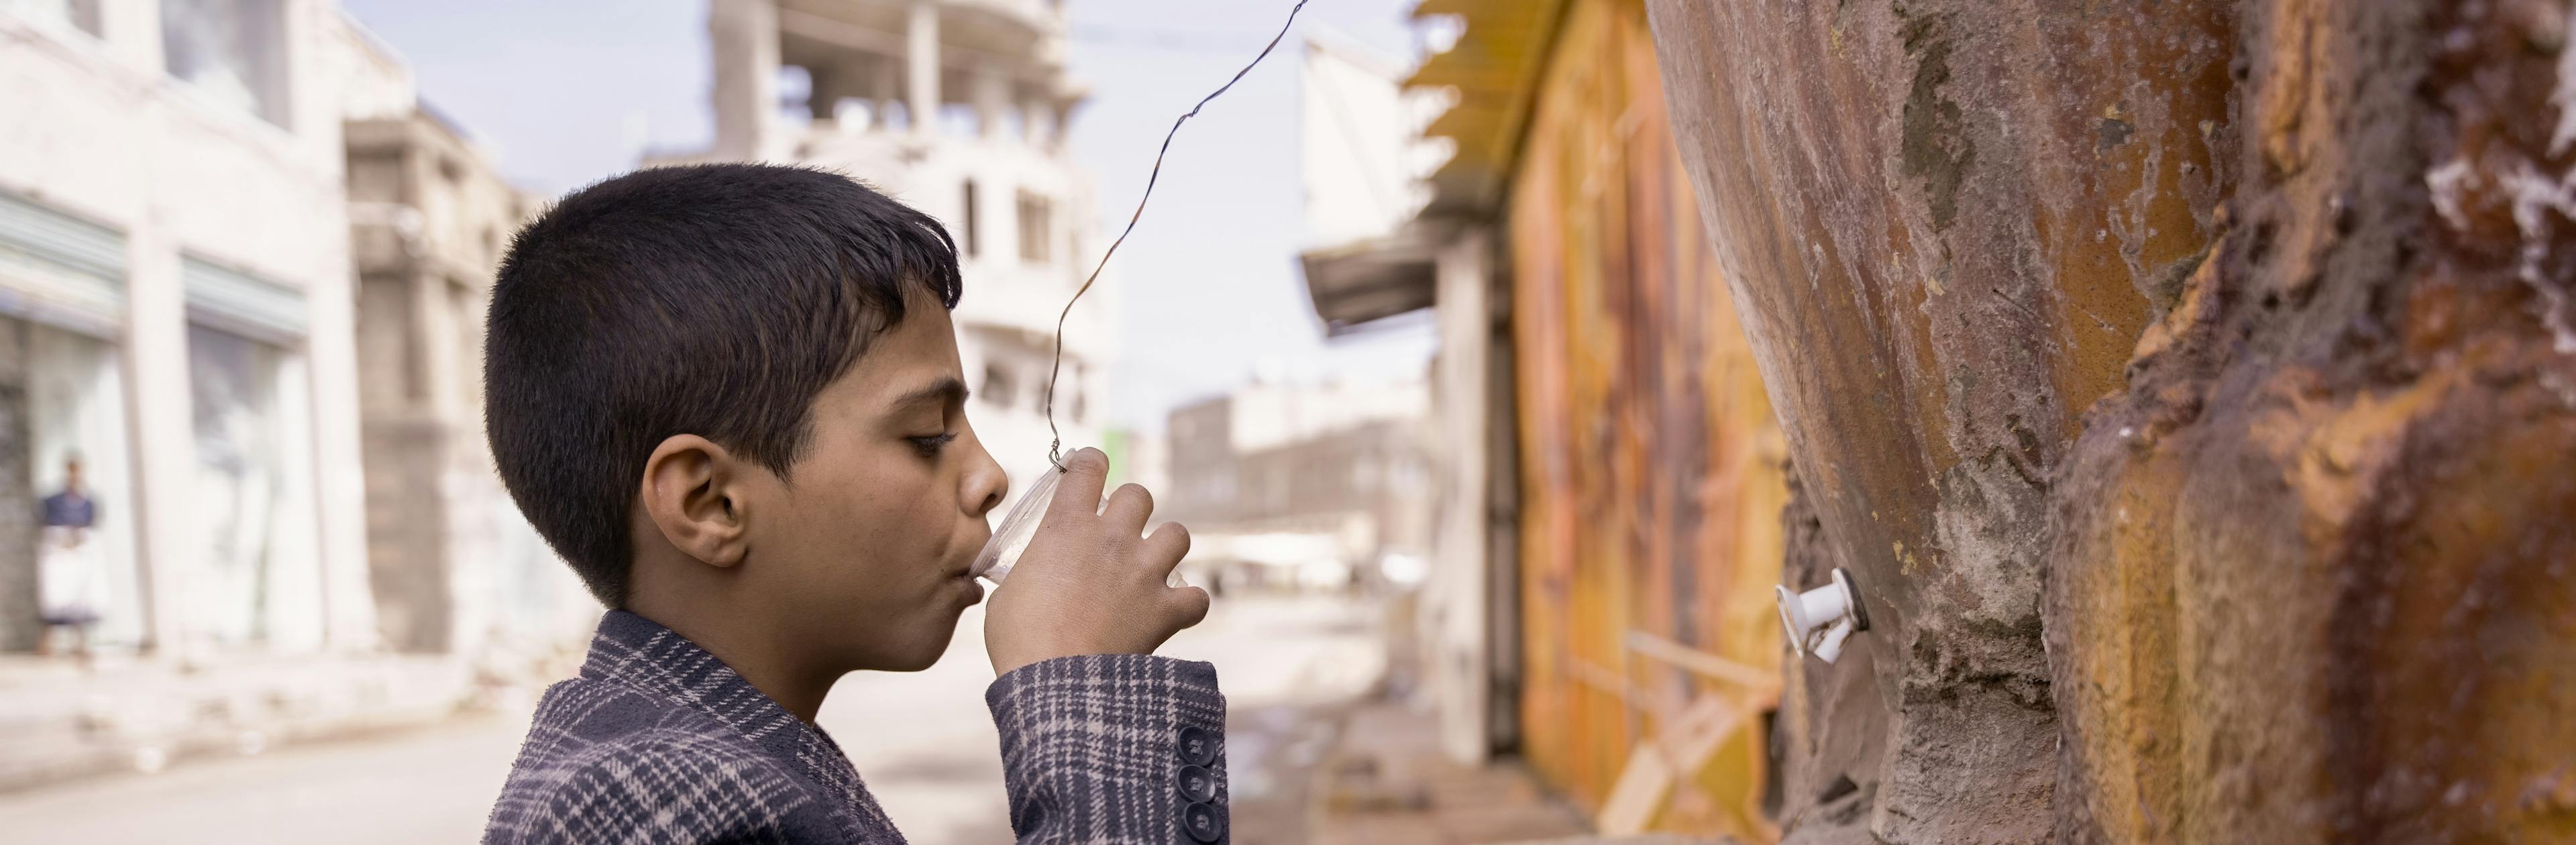 A child is pictured drinking water from a public clay cooler in Dhamar Governorate, Yemen. The availability of clean water is a critical issue in Yemen, where many communities lack access to safe drinking water. 